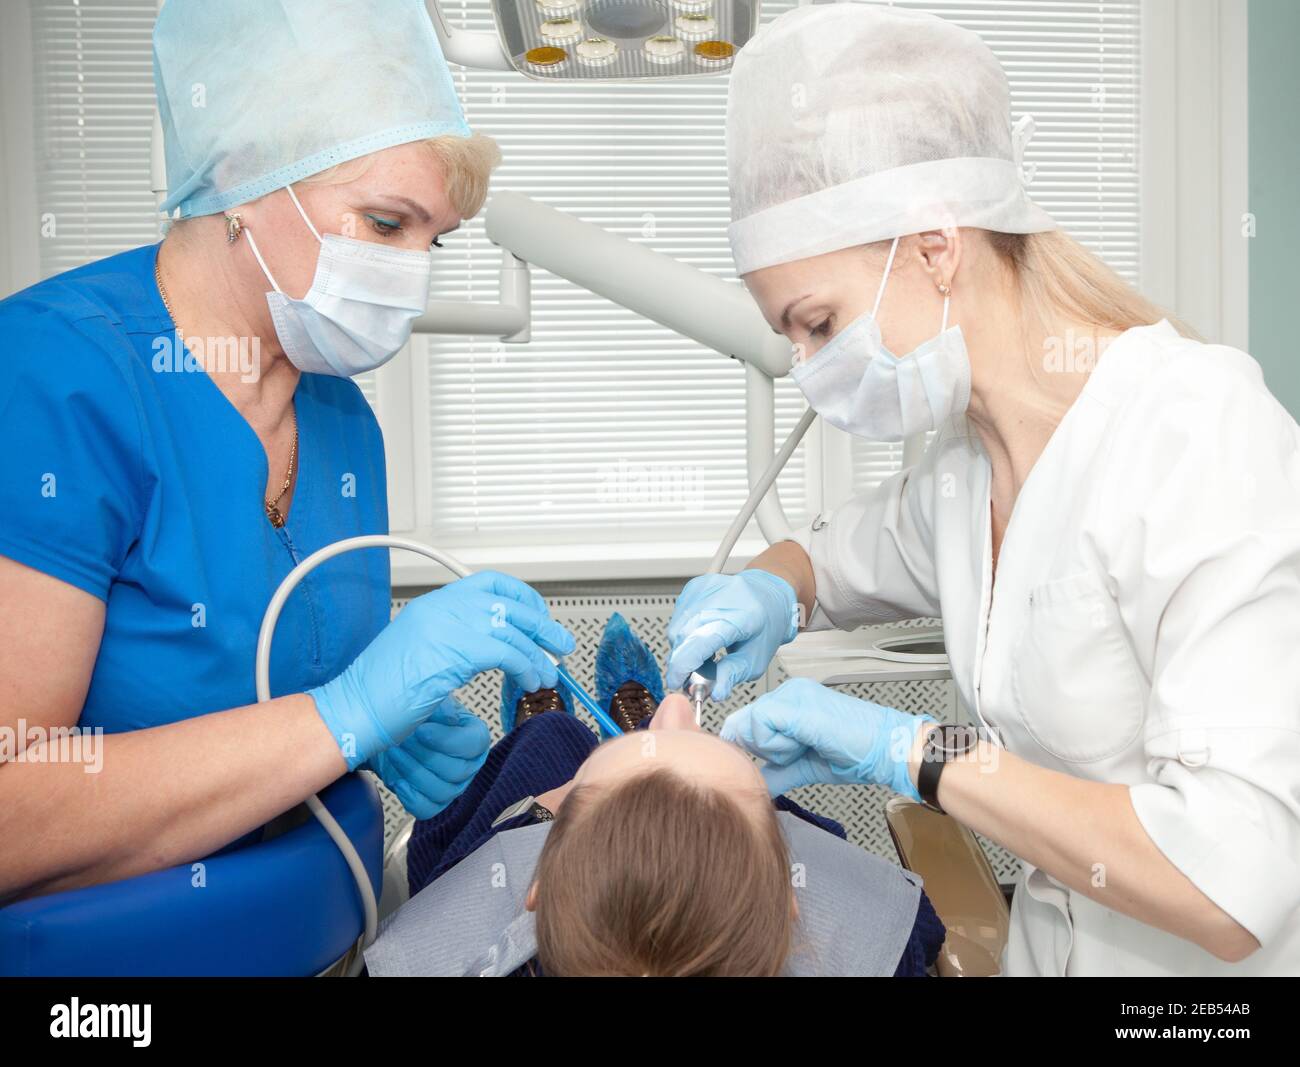 dentist, dental office, tooth, caries, toothache, medical care, dental office, Stock Photo